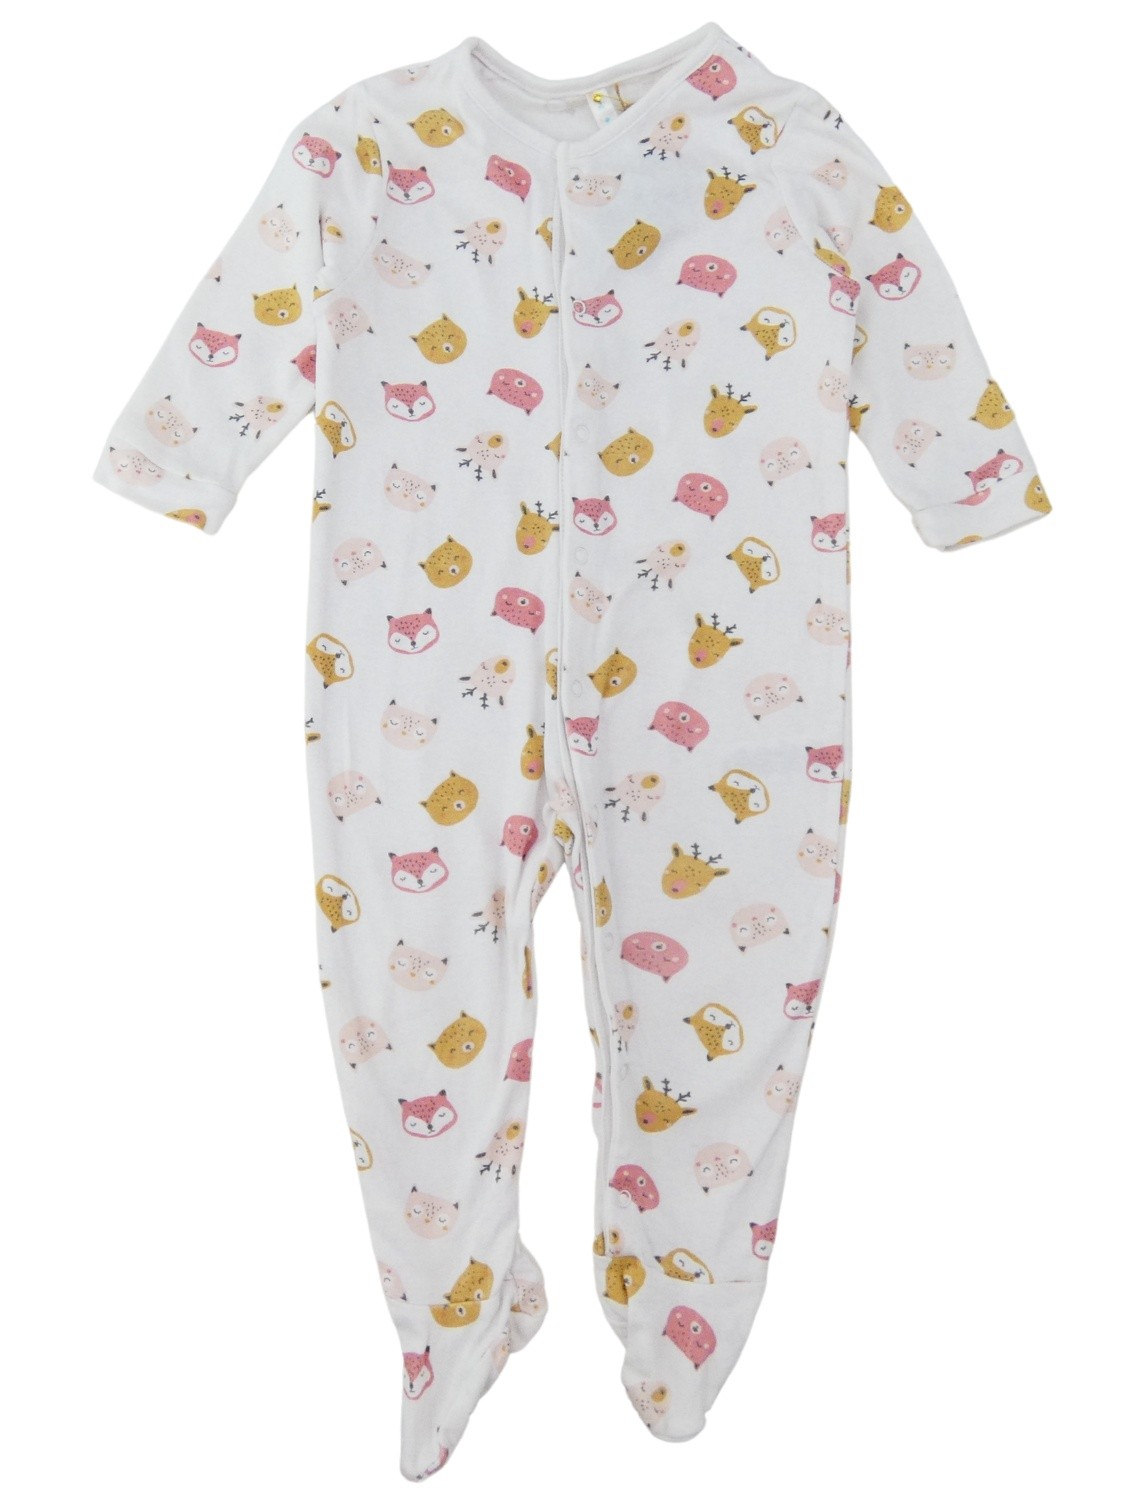 Pyjama une pièce ML animaux foret TEX taille 9 mois